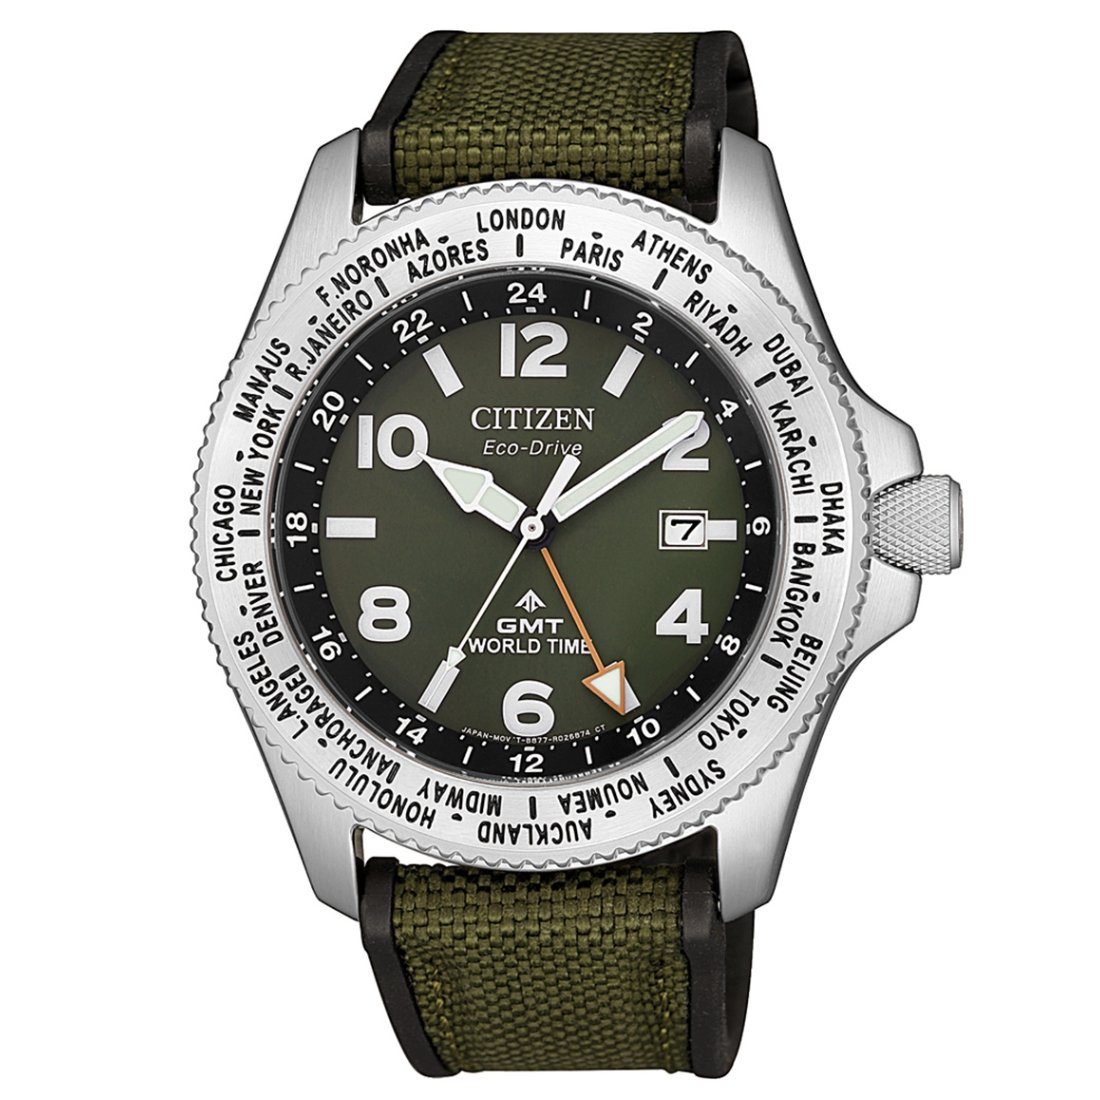 Citizen BJ7100-23X Promaster GMT Green Dial World Time Eco-Drive Watch -Citizen